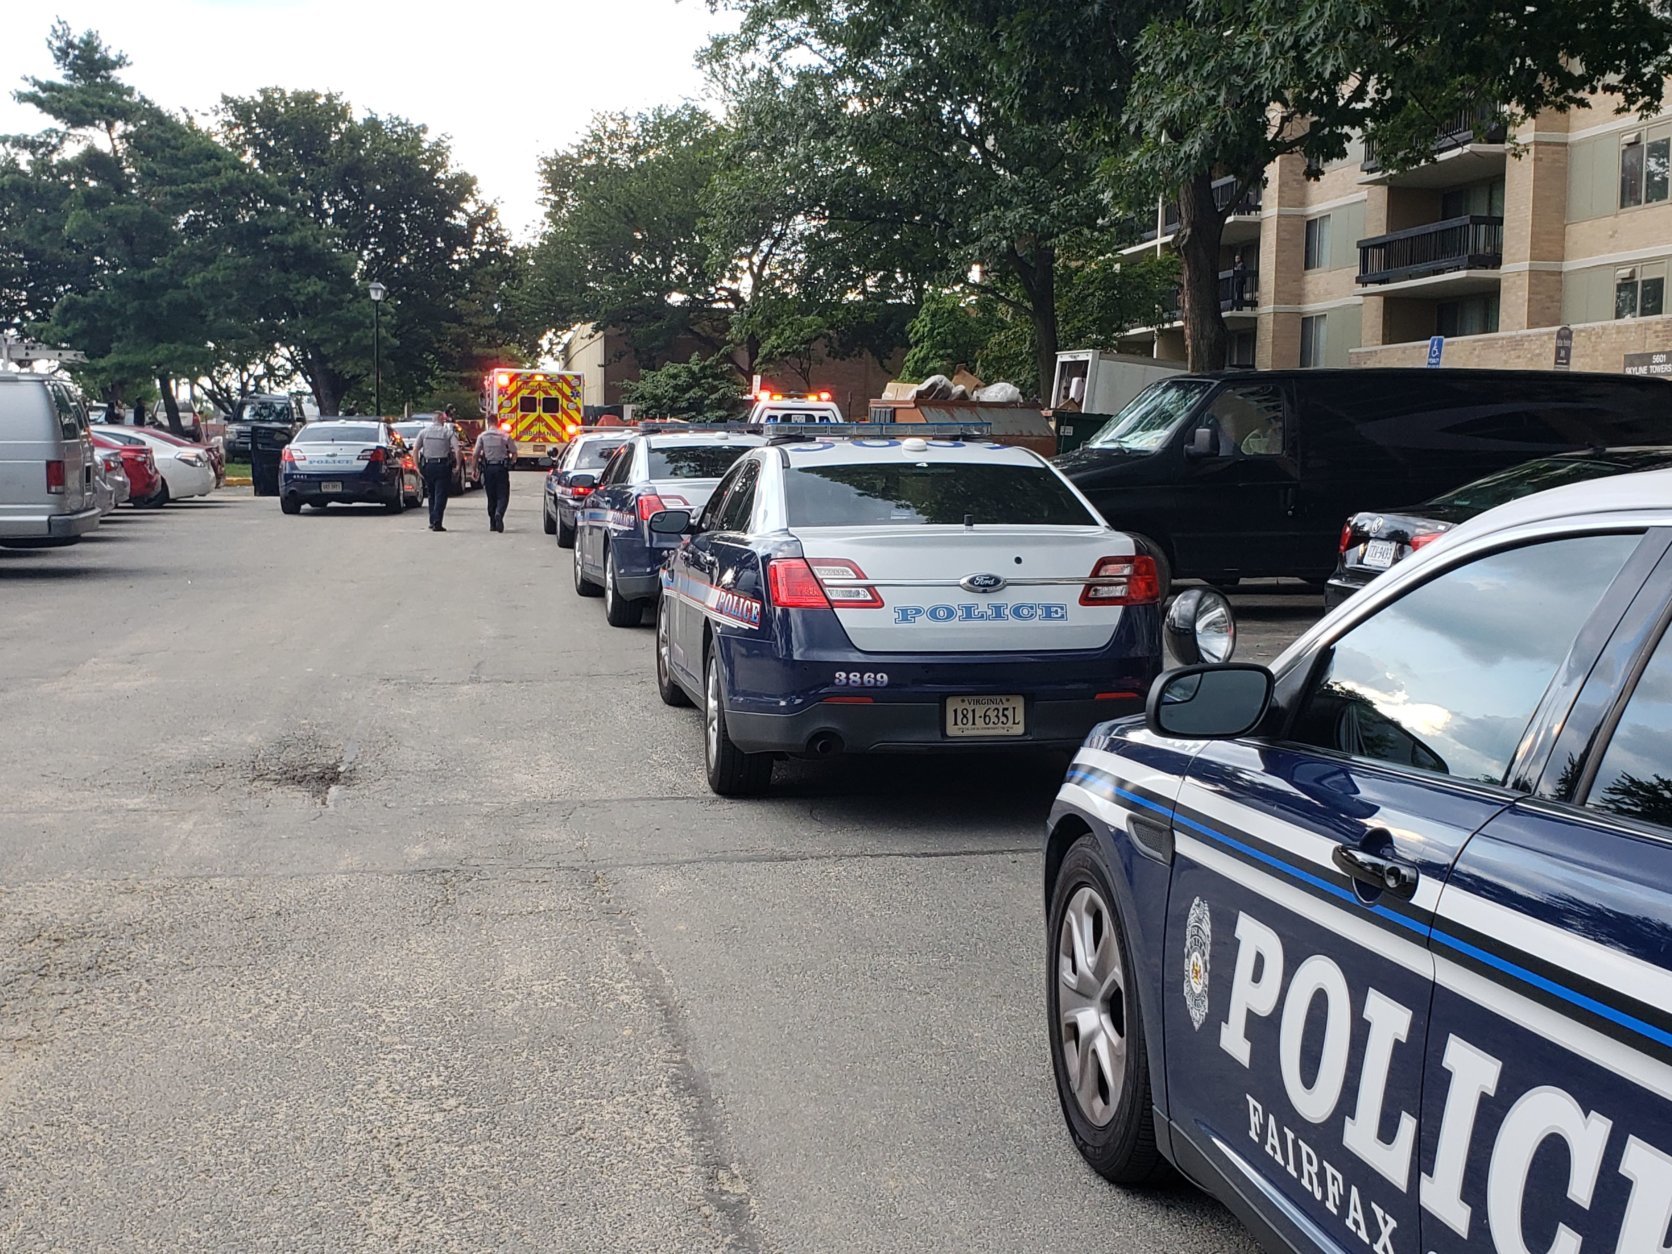 Fairfax County police said a child fell from a window in the 5600 block of Seminary Road. (Courtesy Mark Wilkins) 